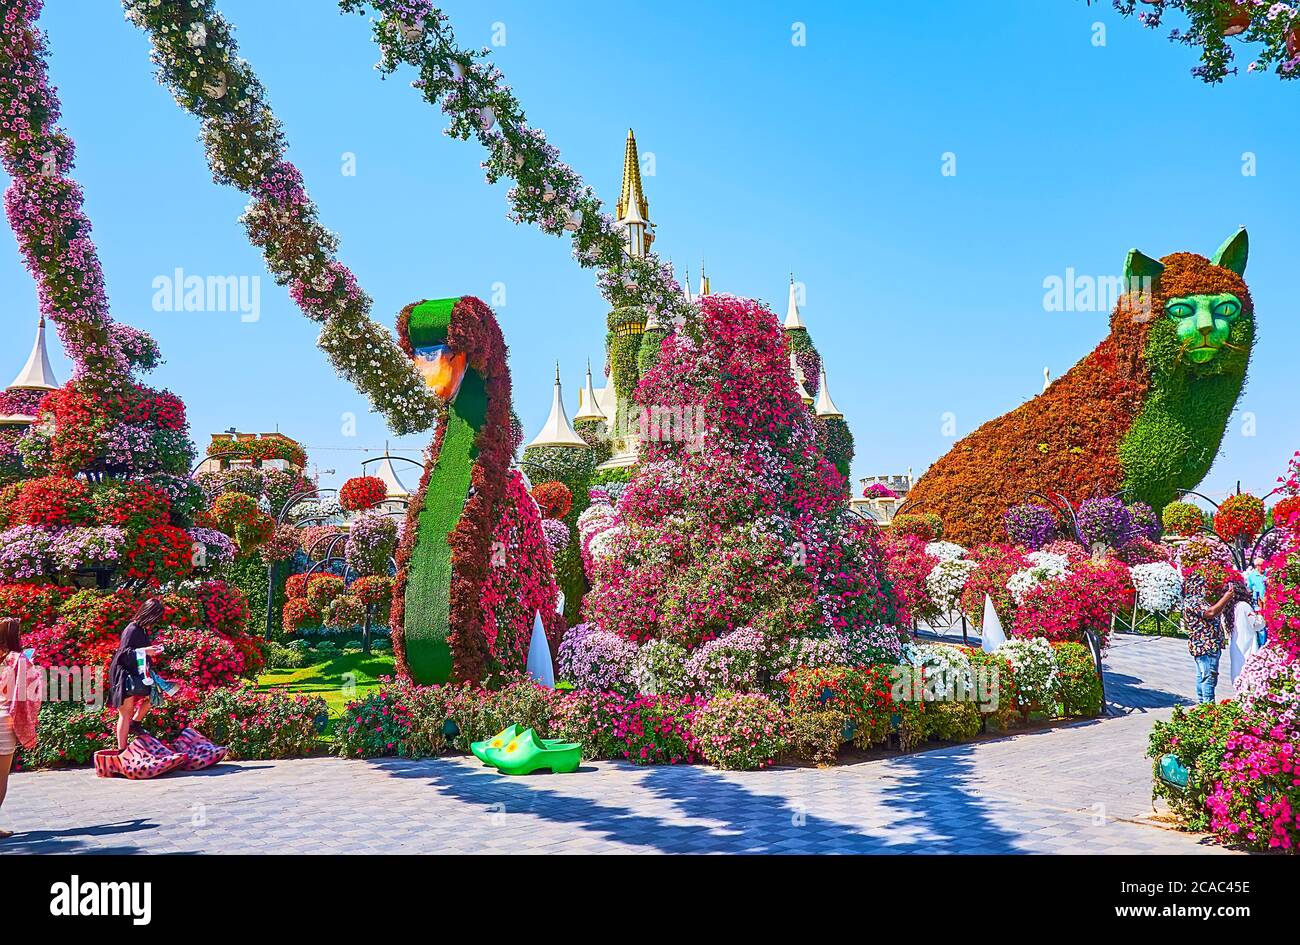 DUBAI, UAE - MARCH 5, 2020: The animals and birds installations in Miracle Garden are surrounded with millions of petunias, growing in flower beds and Stock Photo